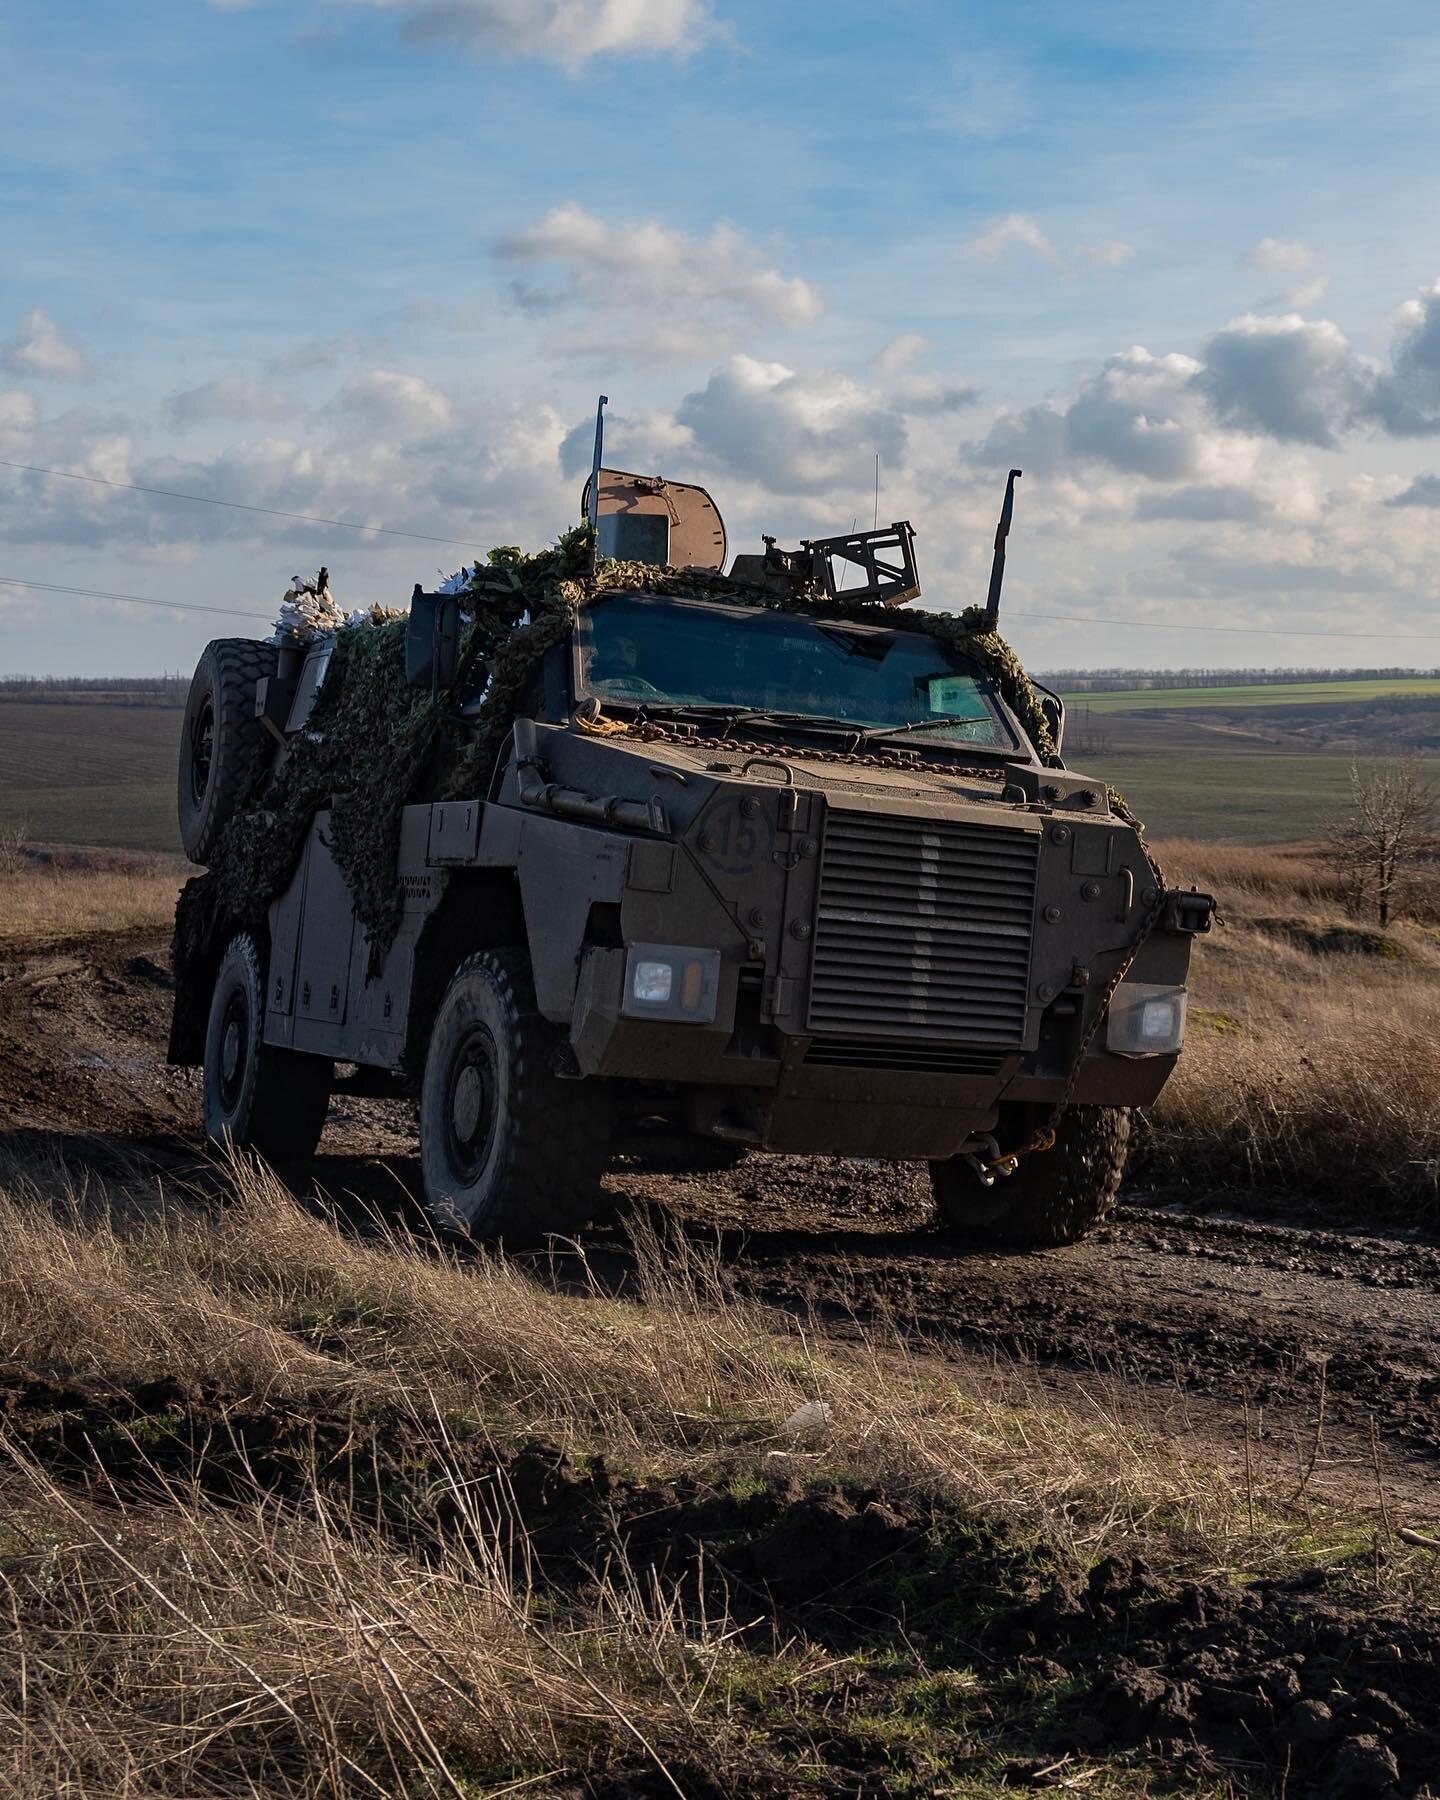 An Australian-built Bushmaster Protected Mobility Vehicle traverses terrain near the front line in Donetsk oblast, eastern Ukraine. Australia showed its support for Ukraine in the aftermath of the 2022 Russian invasion by gifting 120 Bushmaster vehic